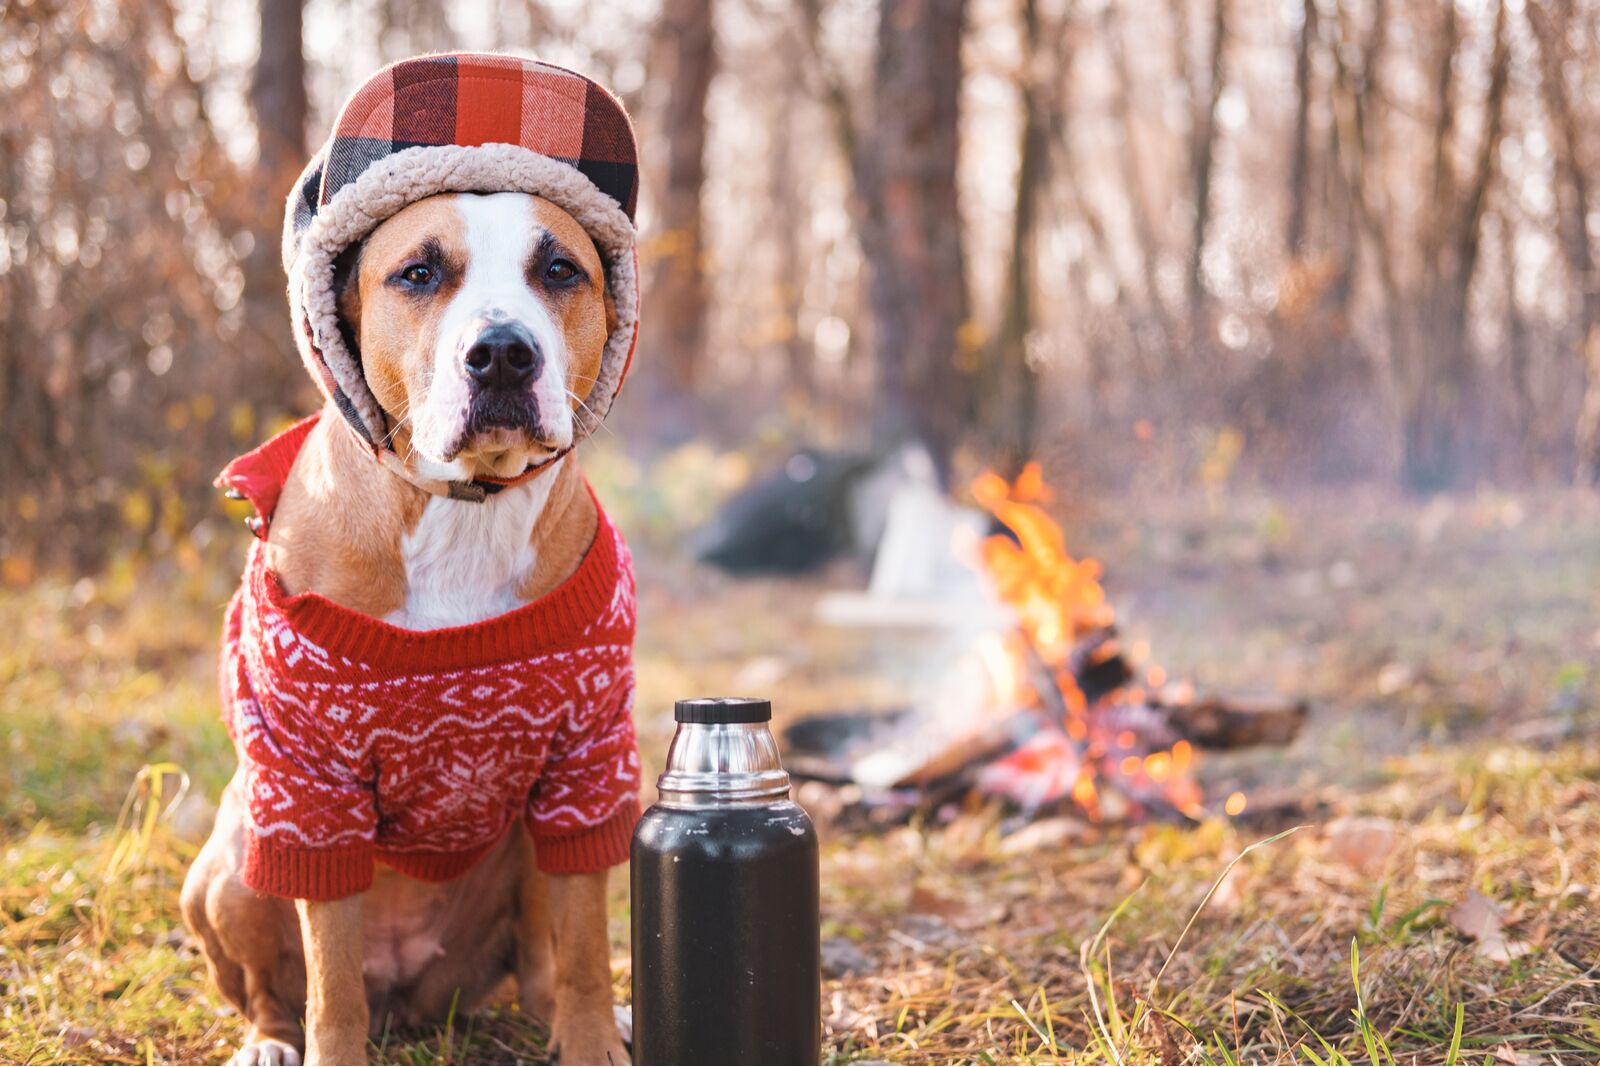 camping etiquette dog by fire